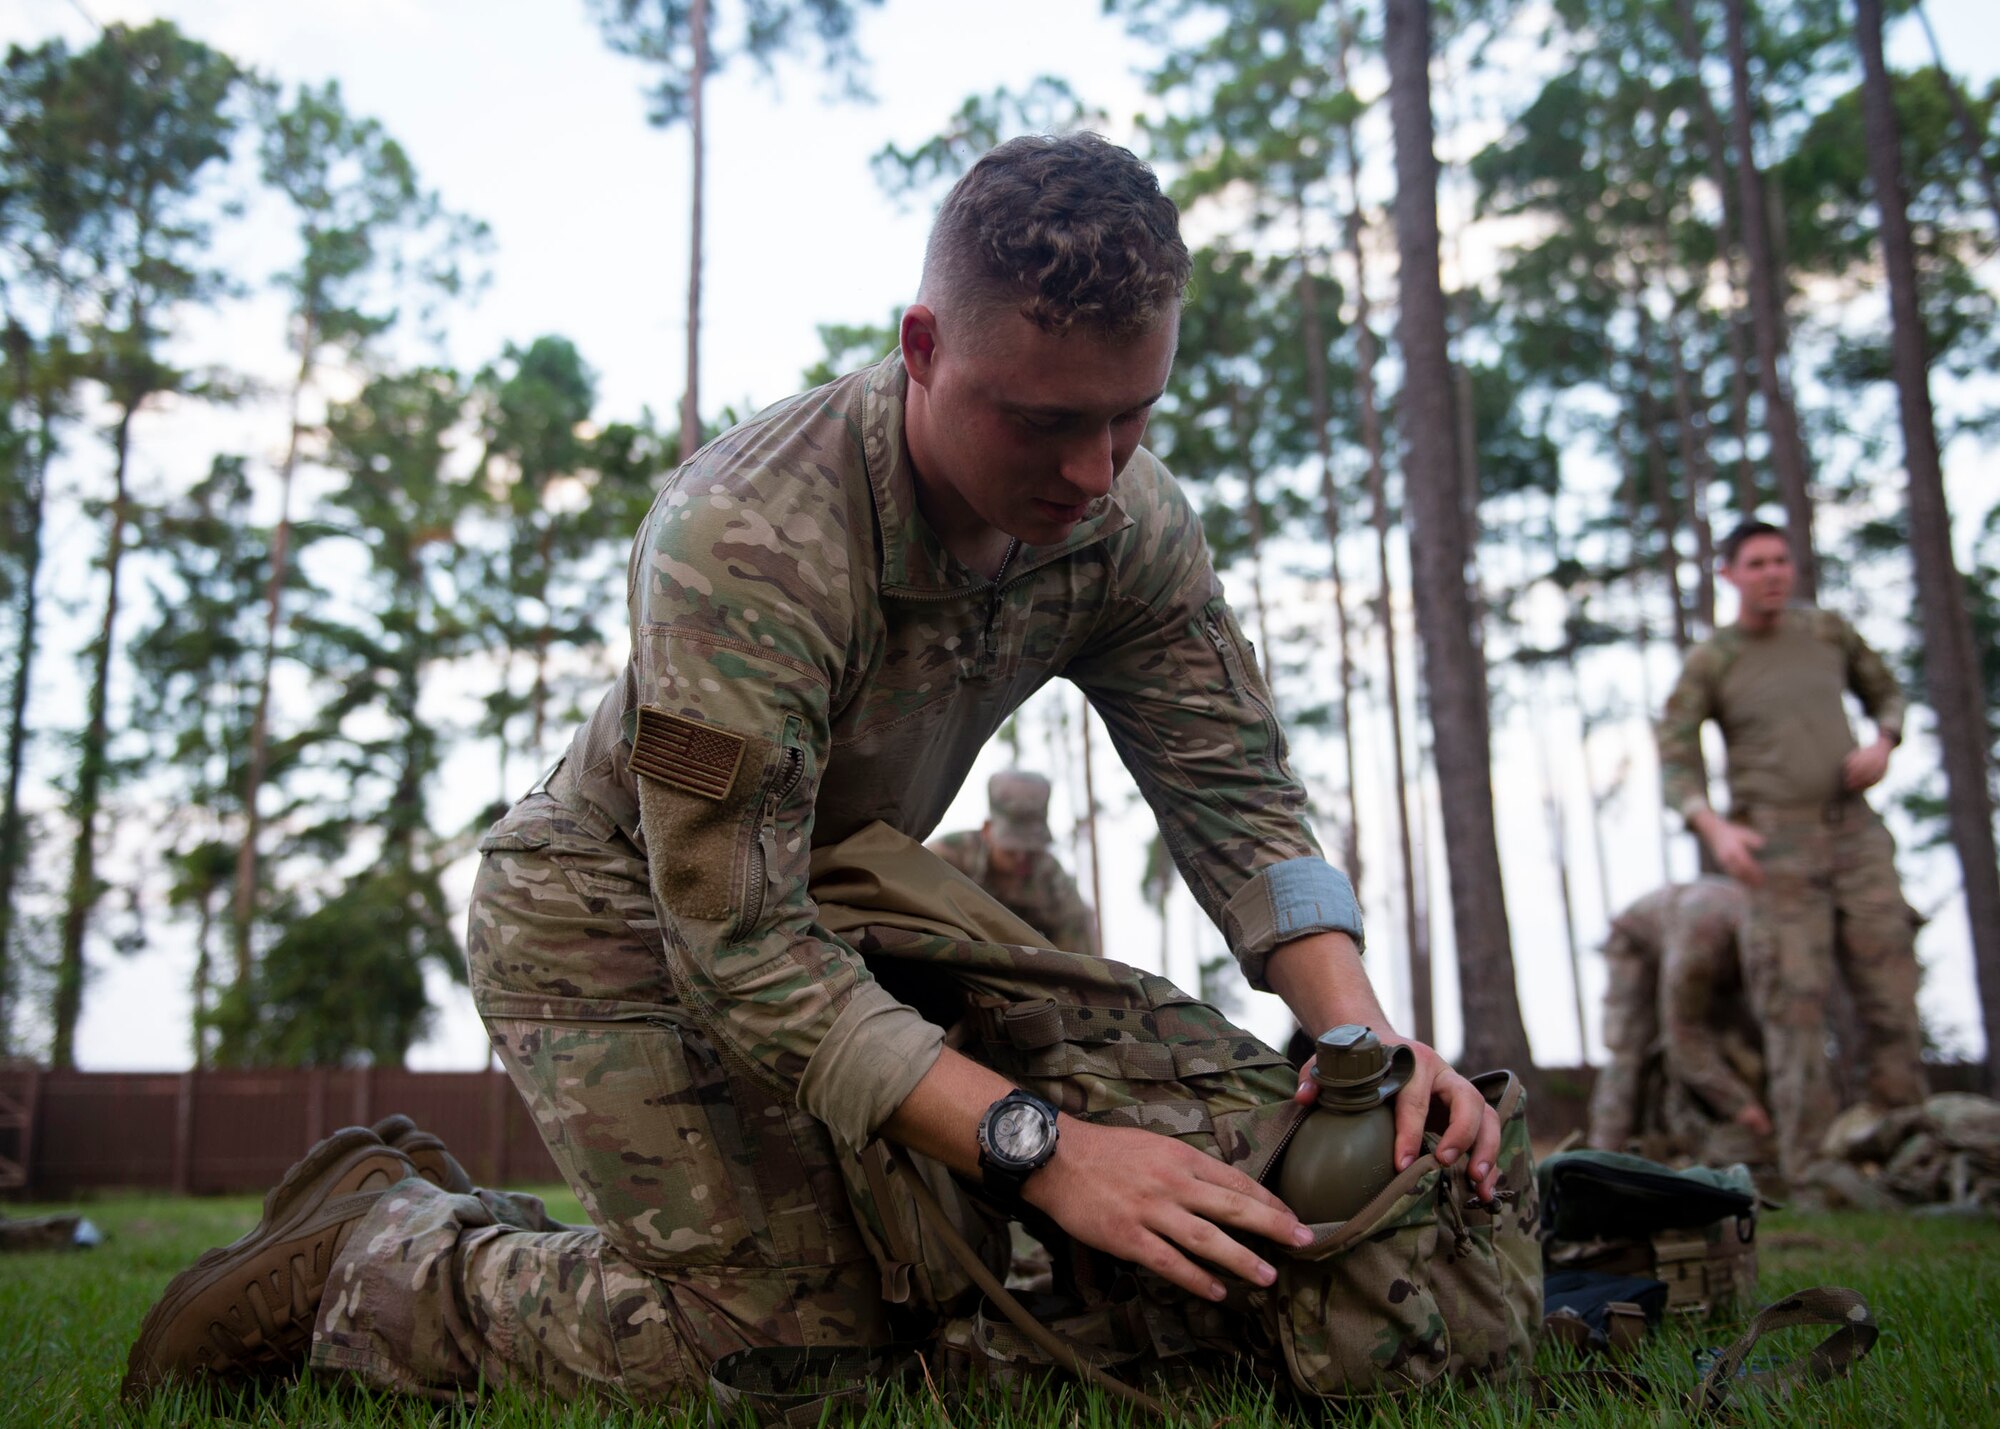 Airman 1st Class Elijah Weiner, 824th Base Defense Squadron fire team member, unpacks a bag during the Tactical Leaders Course, Aug. 10, 2019, at Moody Air Force Base, Ga. The 7-dayTactical Leaders Course revolved around squad leaders developing their skills to effectively communicate, team build and mission plan. These skills were assessed during a 36-hour simulated operation where squad leaders lead Airmen through tactical situations. (U.S. Air Force photo by Airman Azaria E. Foster)